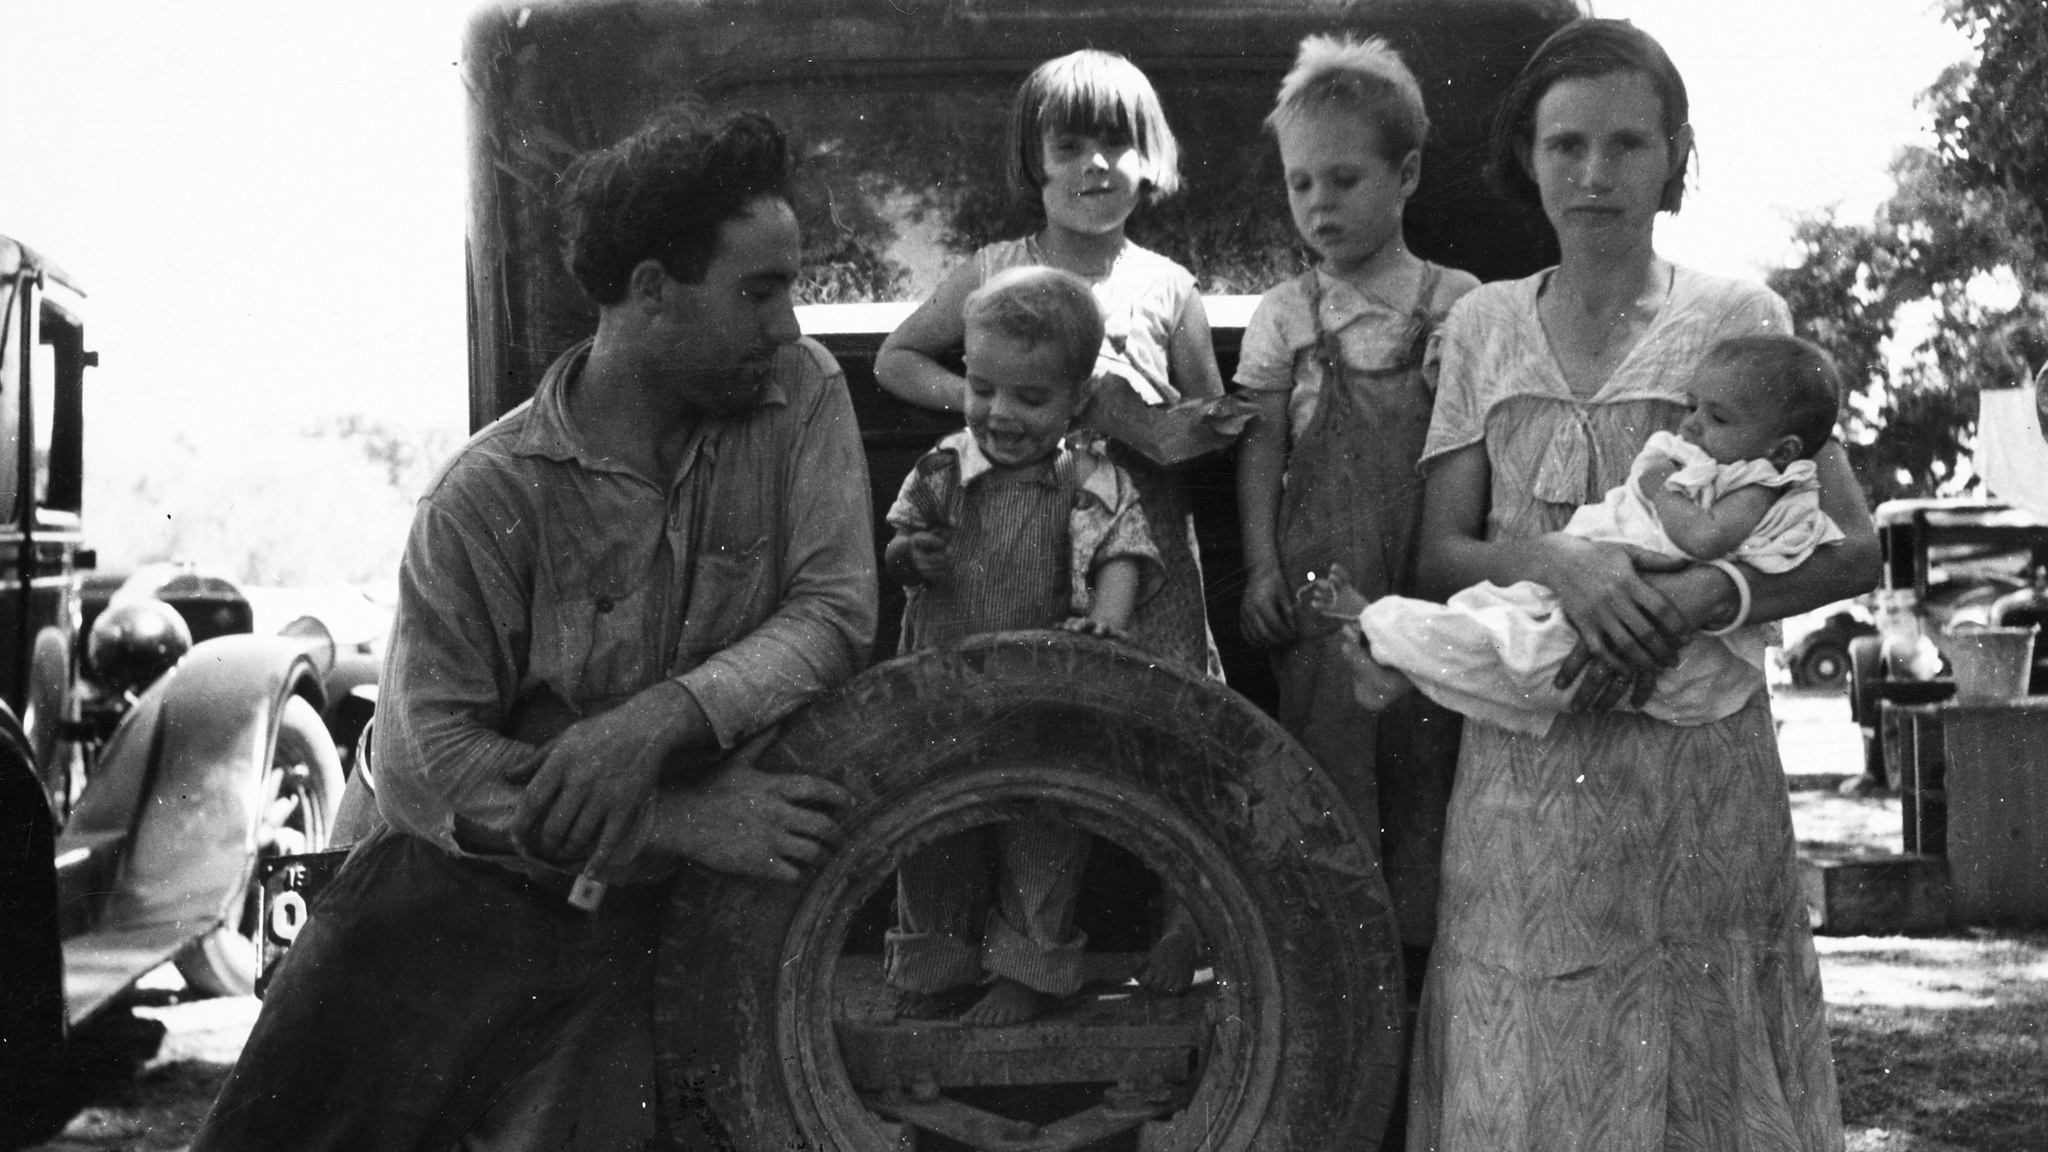 Life for the Average Family During the Great Depression